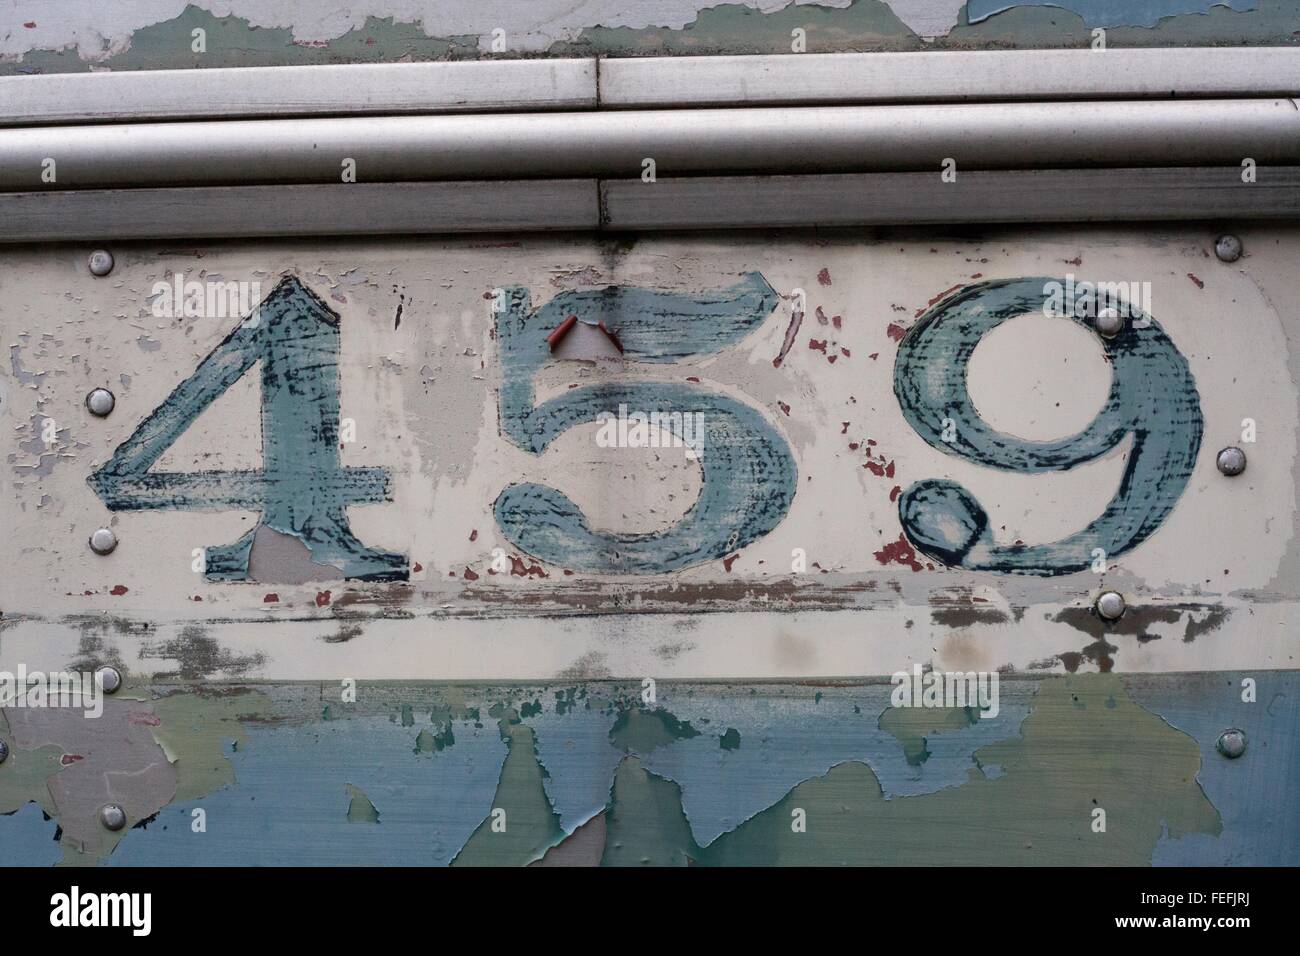 459 numbers on an old Brill Trolley Bus, worn faded and scratched, corroded and oxidized blue paint, shabby from time weathered Stock Photo